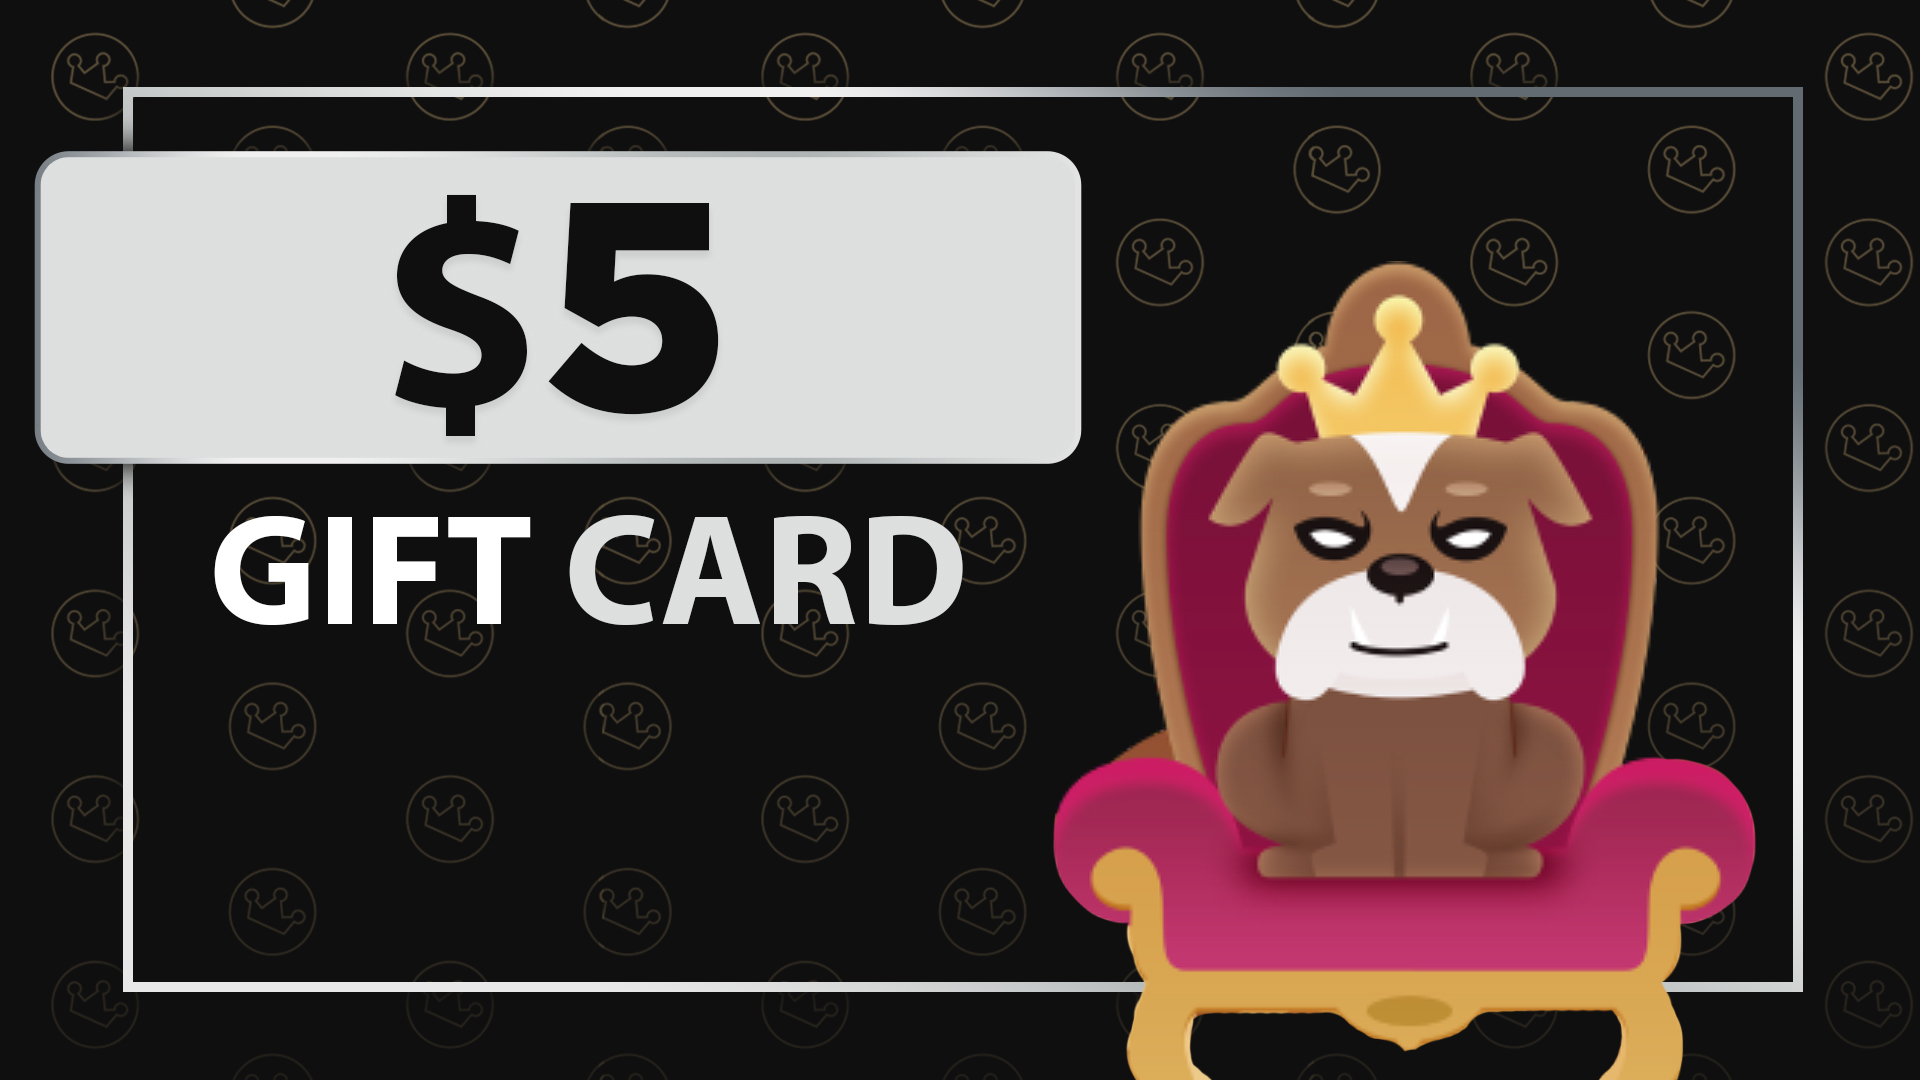 [$ 6.09] RoyaleCases $5 USD Gift Card